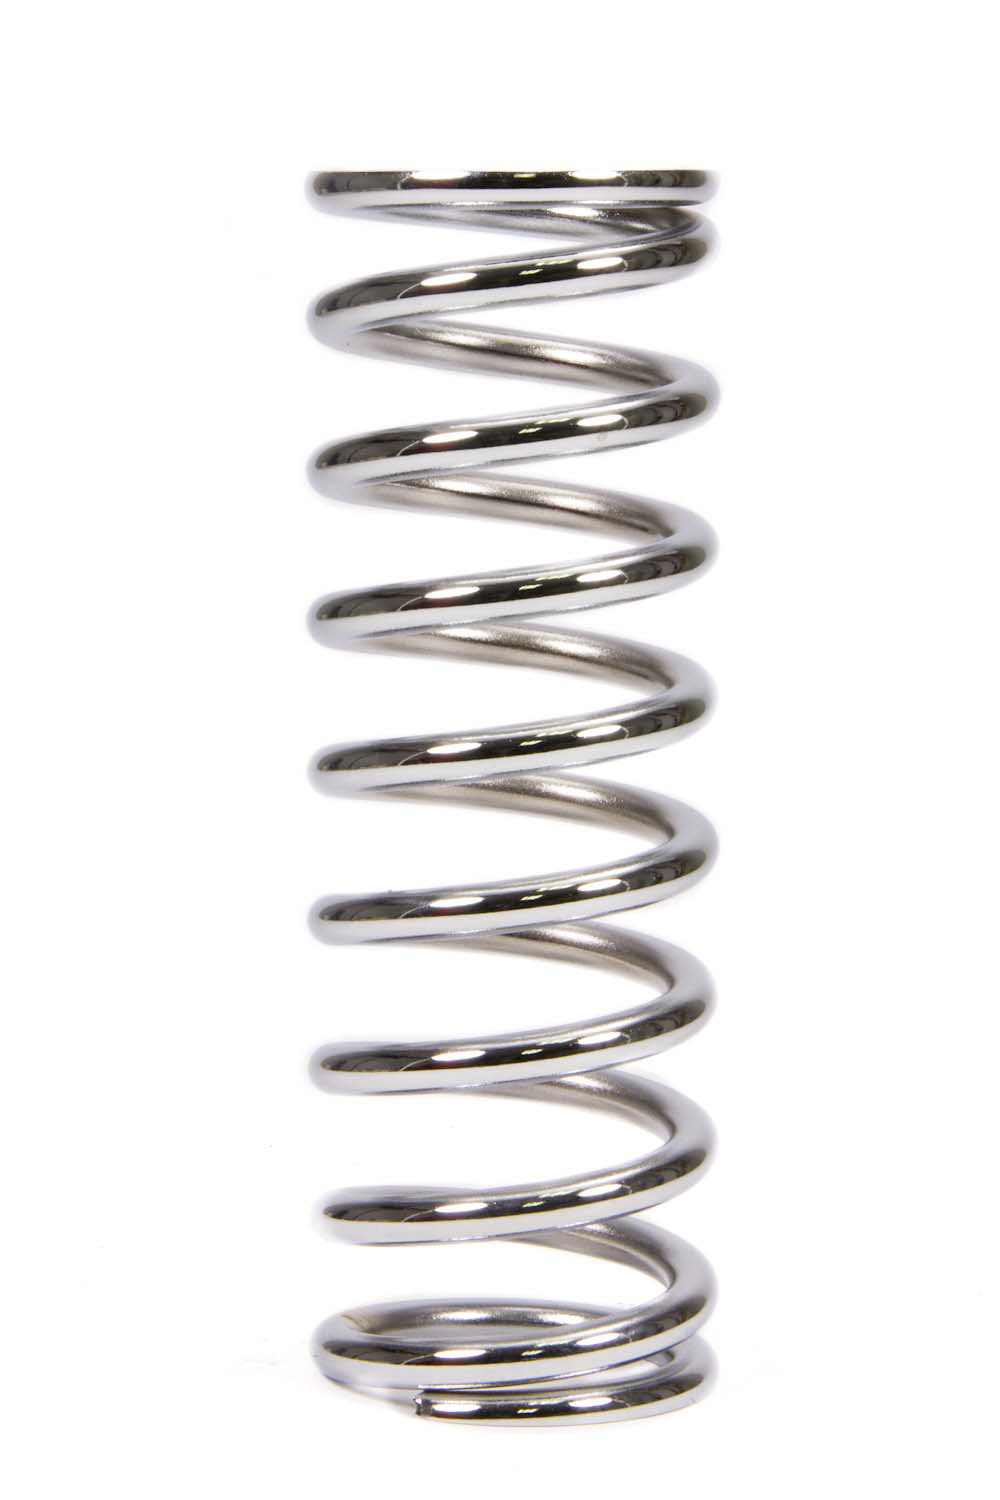 QA1 10CS225 Coil Spring, Coil-Over, 2.500 in ID, 10.000 in Length, 225 lb/in Spring Rate, Steel, Chrome, Each